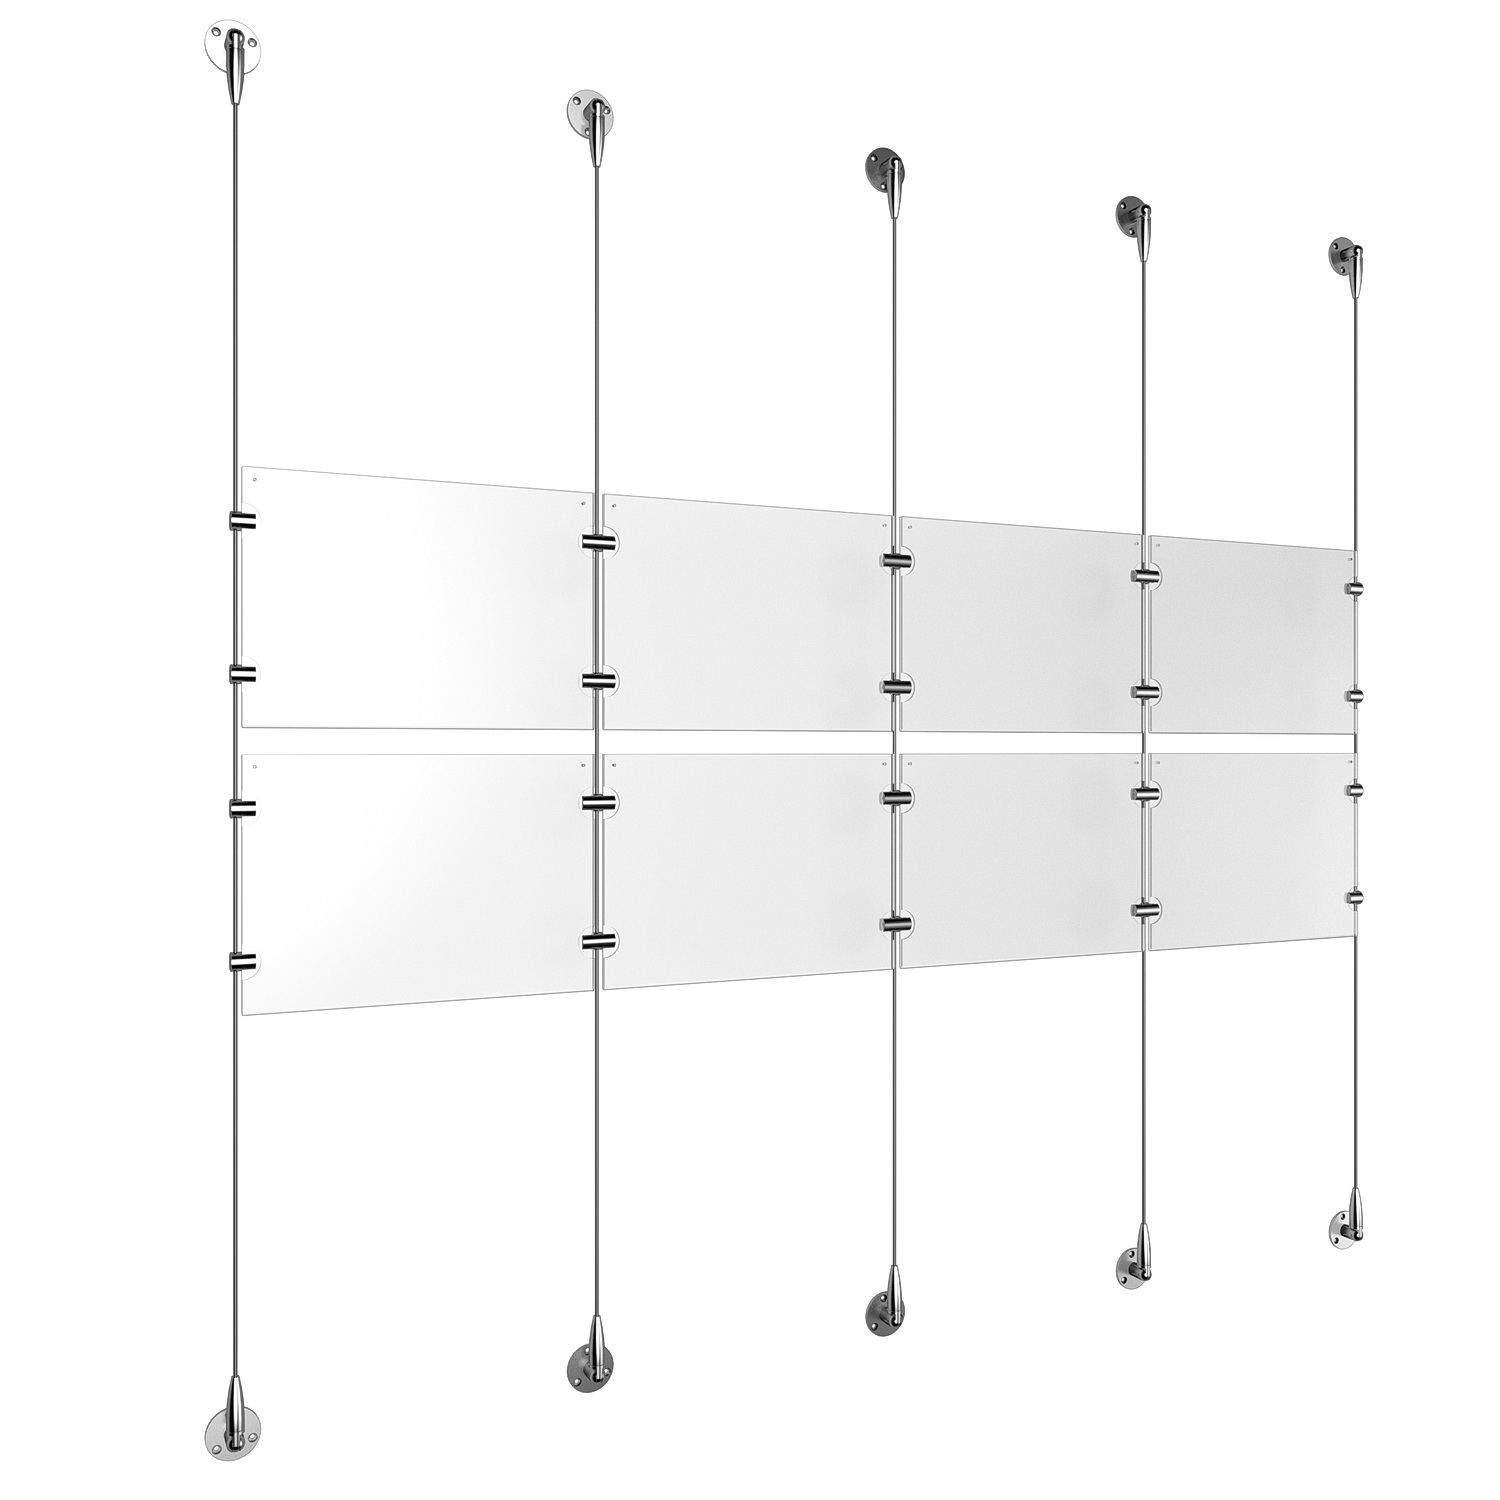 (8) 11'' Width x 8-1/2'' Height Clear Acrylic Frame & (5) Stainless Steel Satin Brushed Adjustable Angle Signature 1/8'' Cable Systems with (8) Single-Sided Panel Grippers (18) Double-Sided Panel Grippers